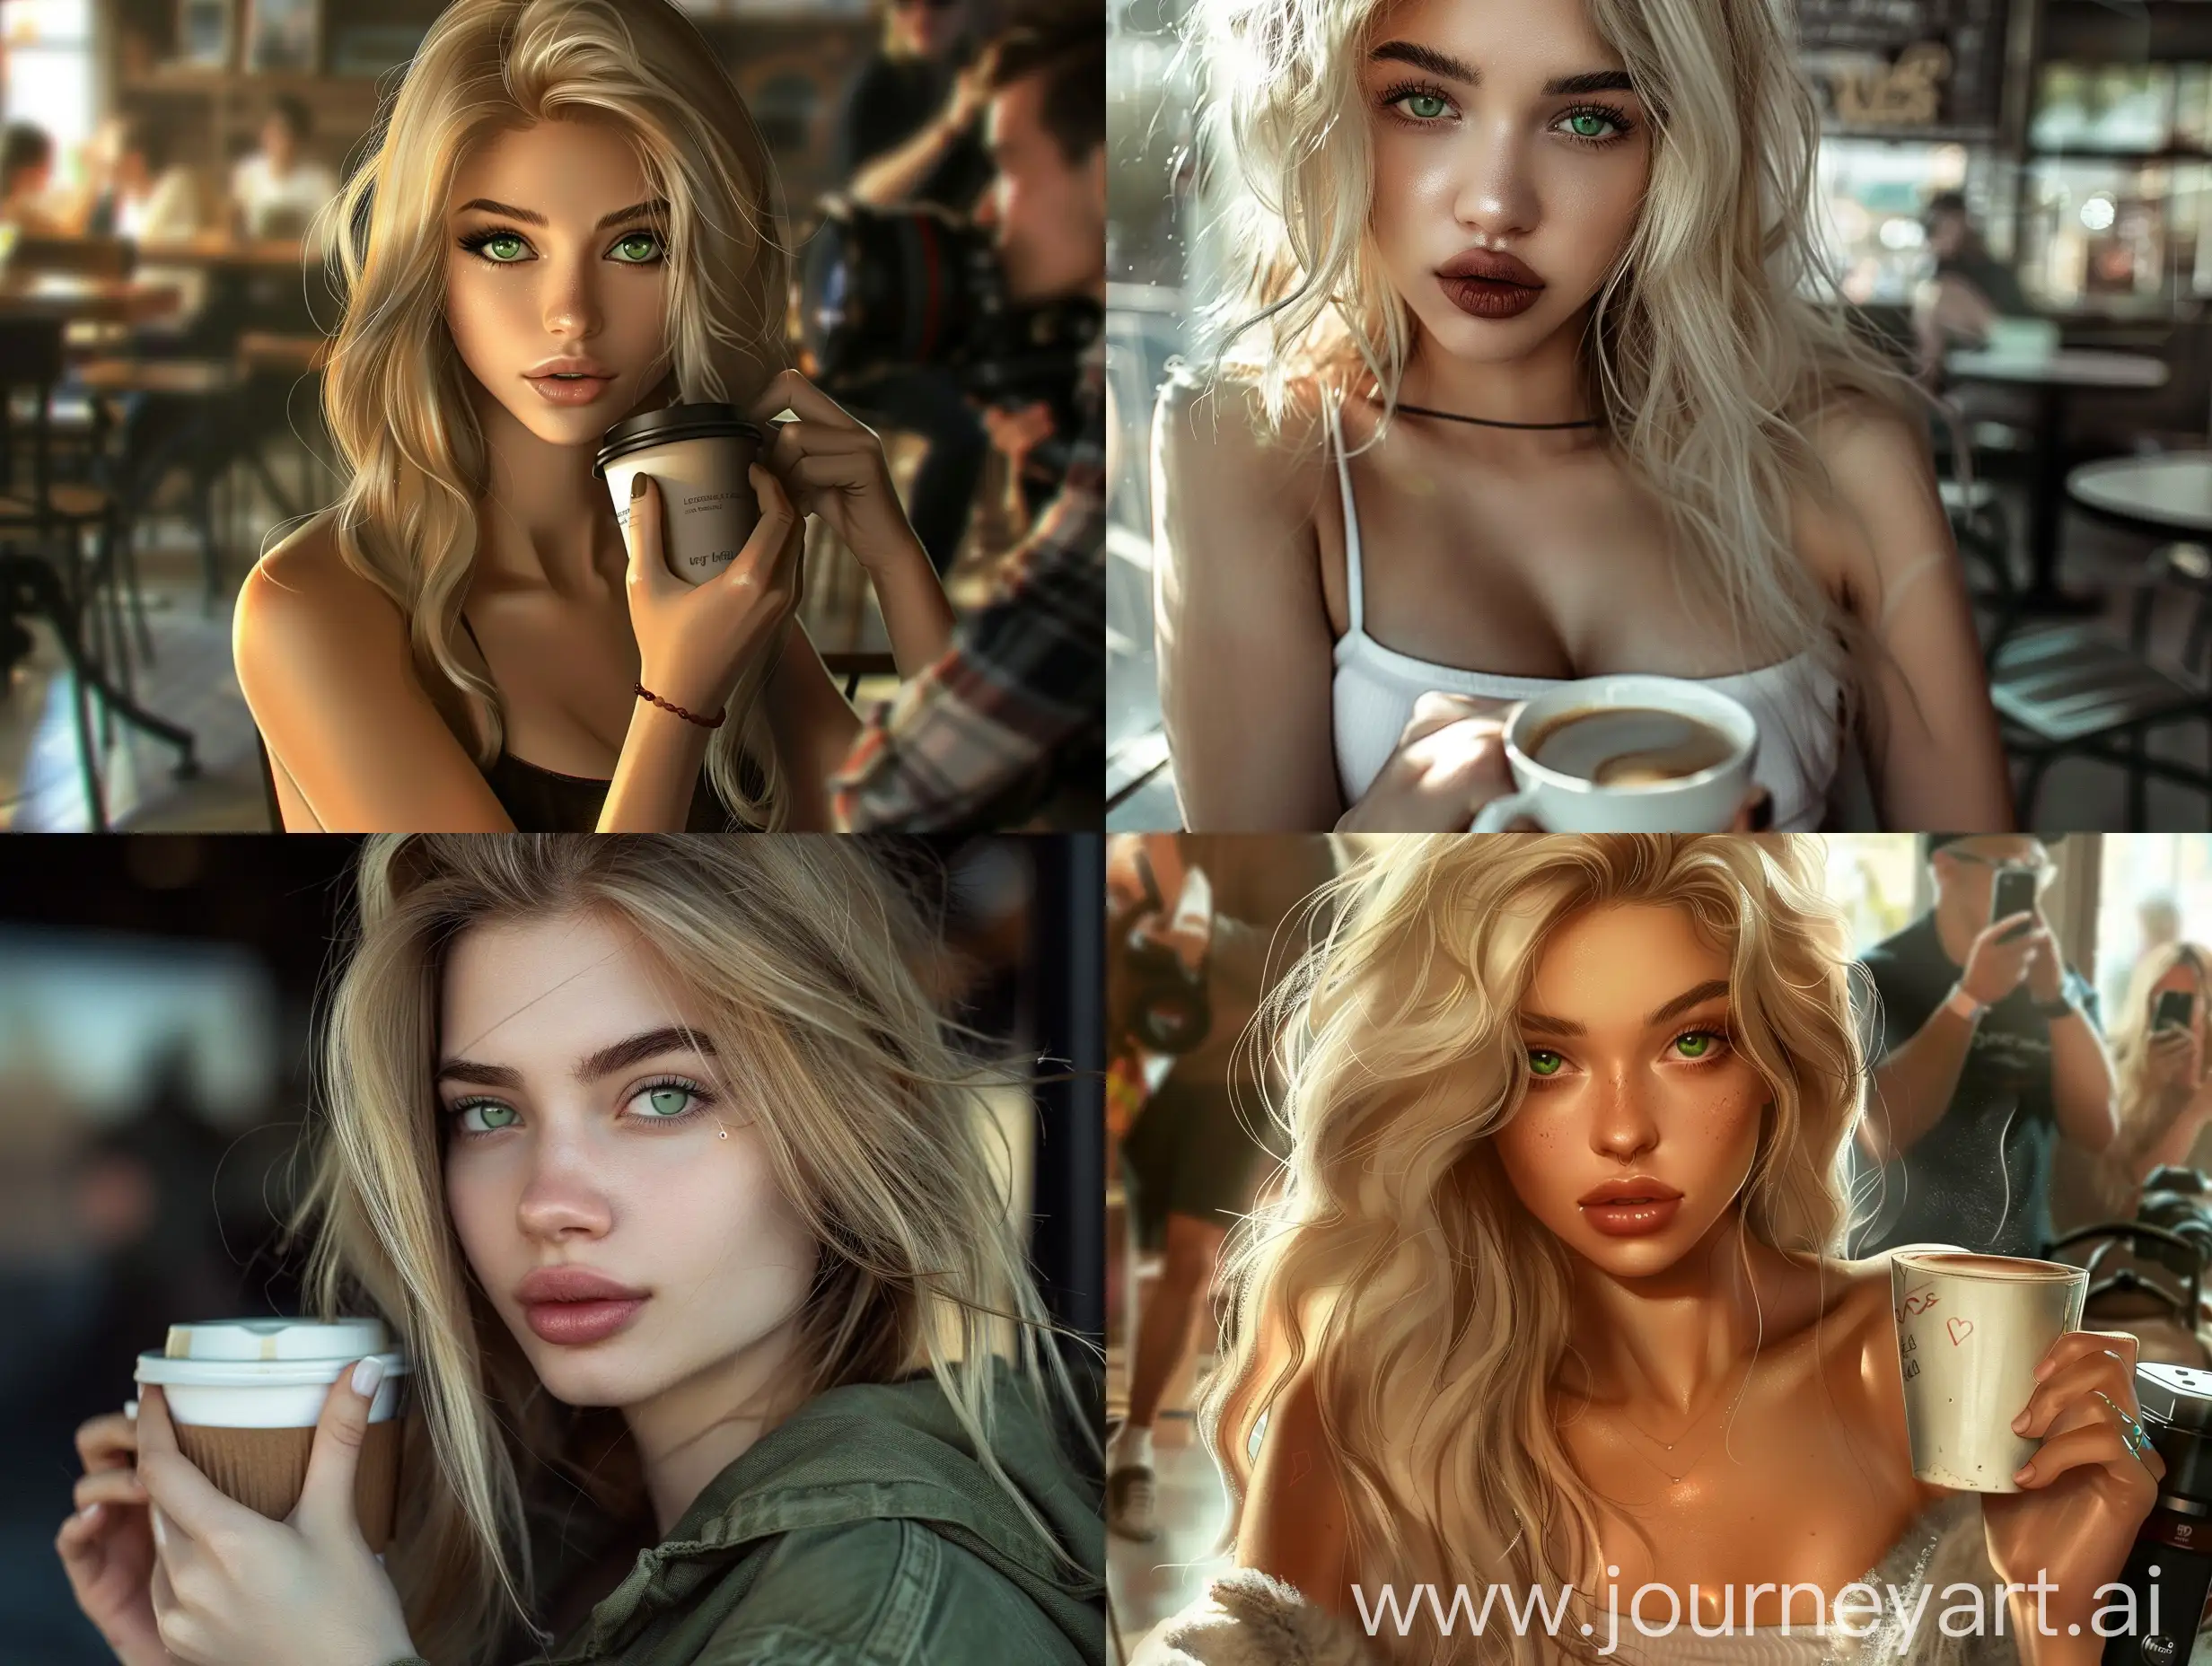 A very beautiful, slim girl with blond hair and green eyes who meets the beauty standards is being photographed by the paparazzi while sitting alone in the cafe with coffee in her hand.